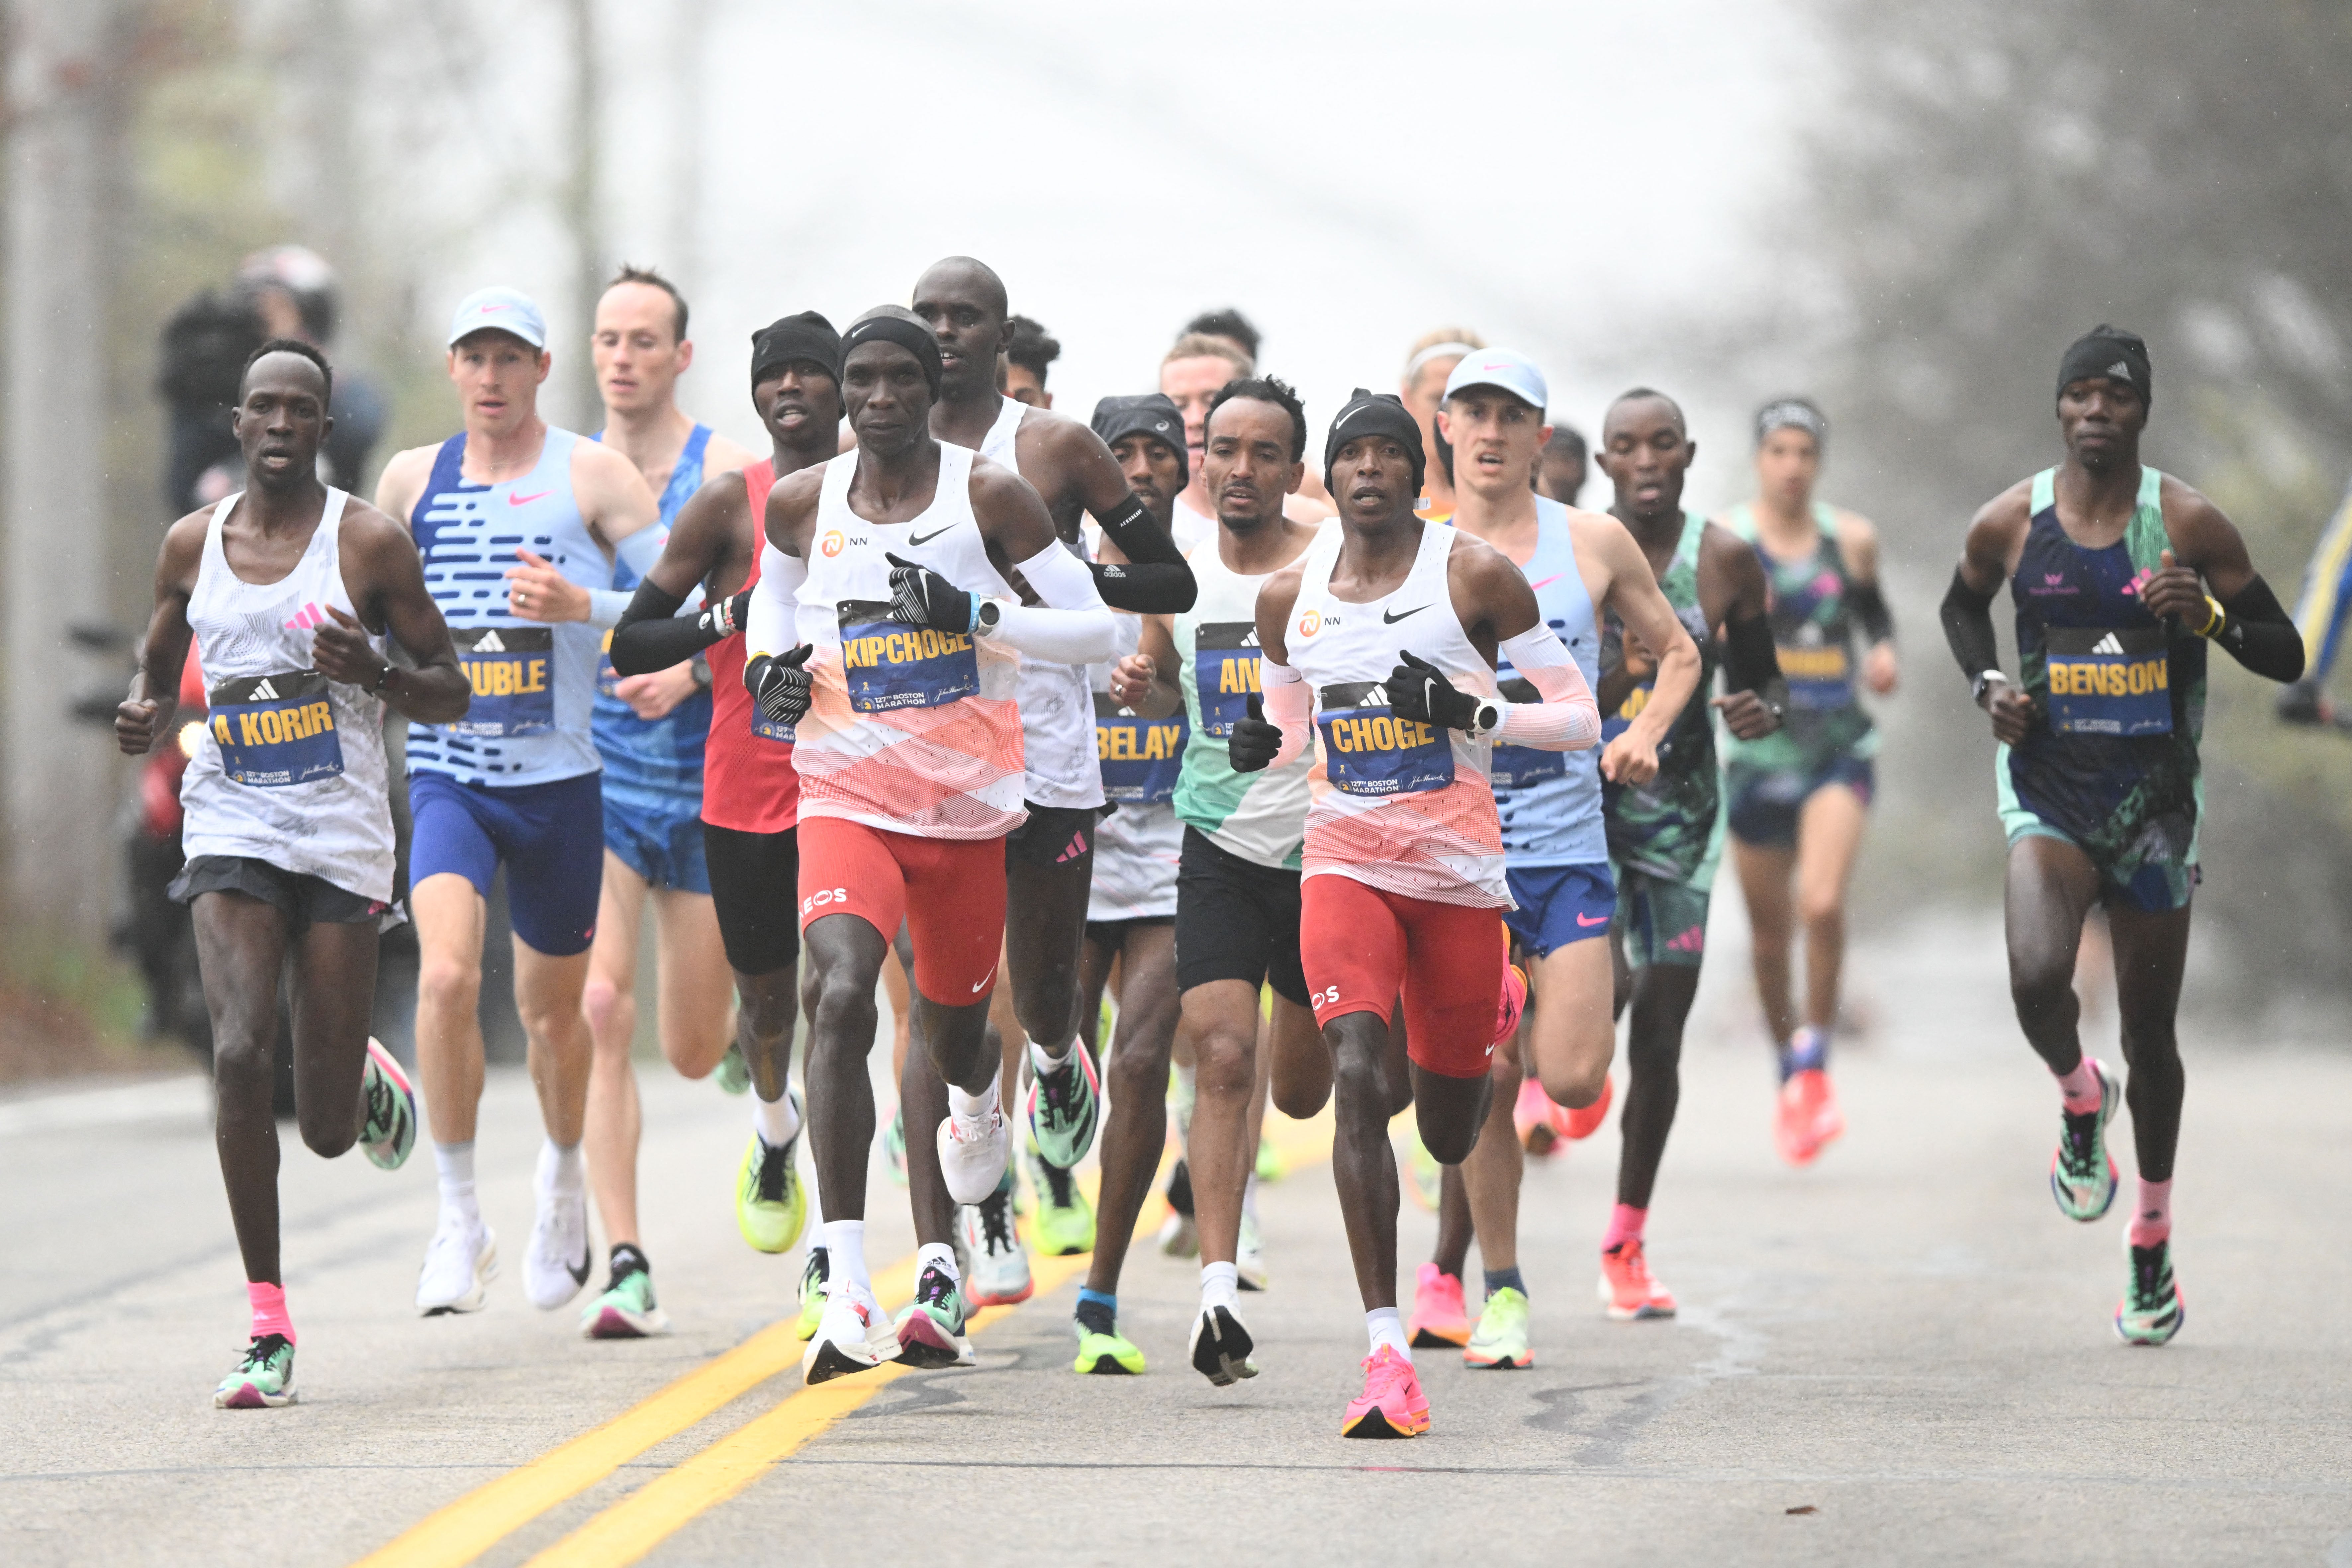 The Boston Marathon is one of distance running’s most popular events